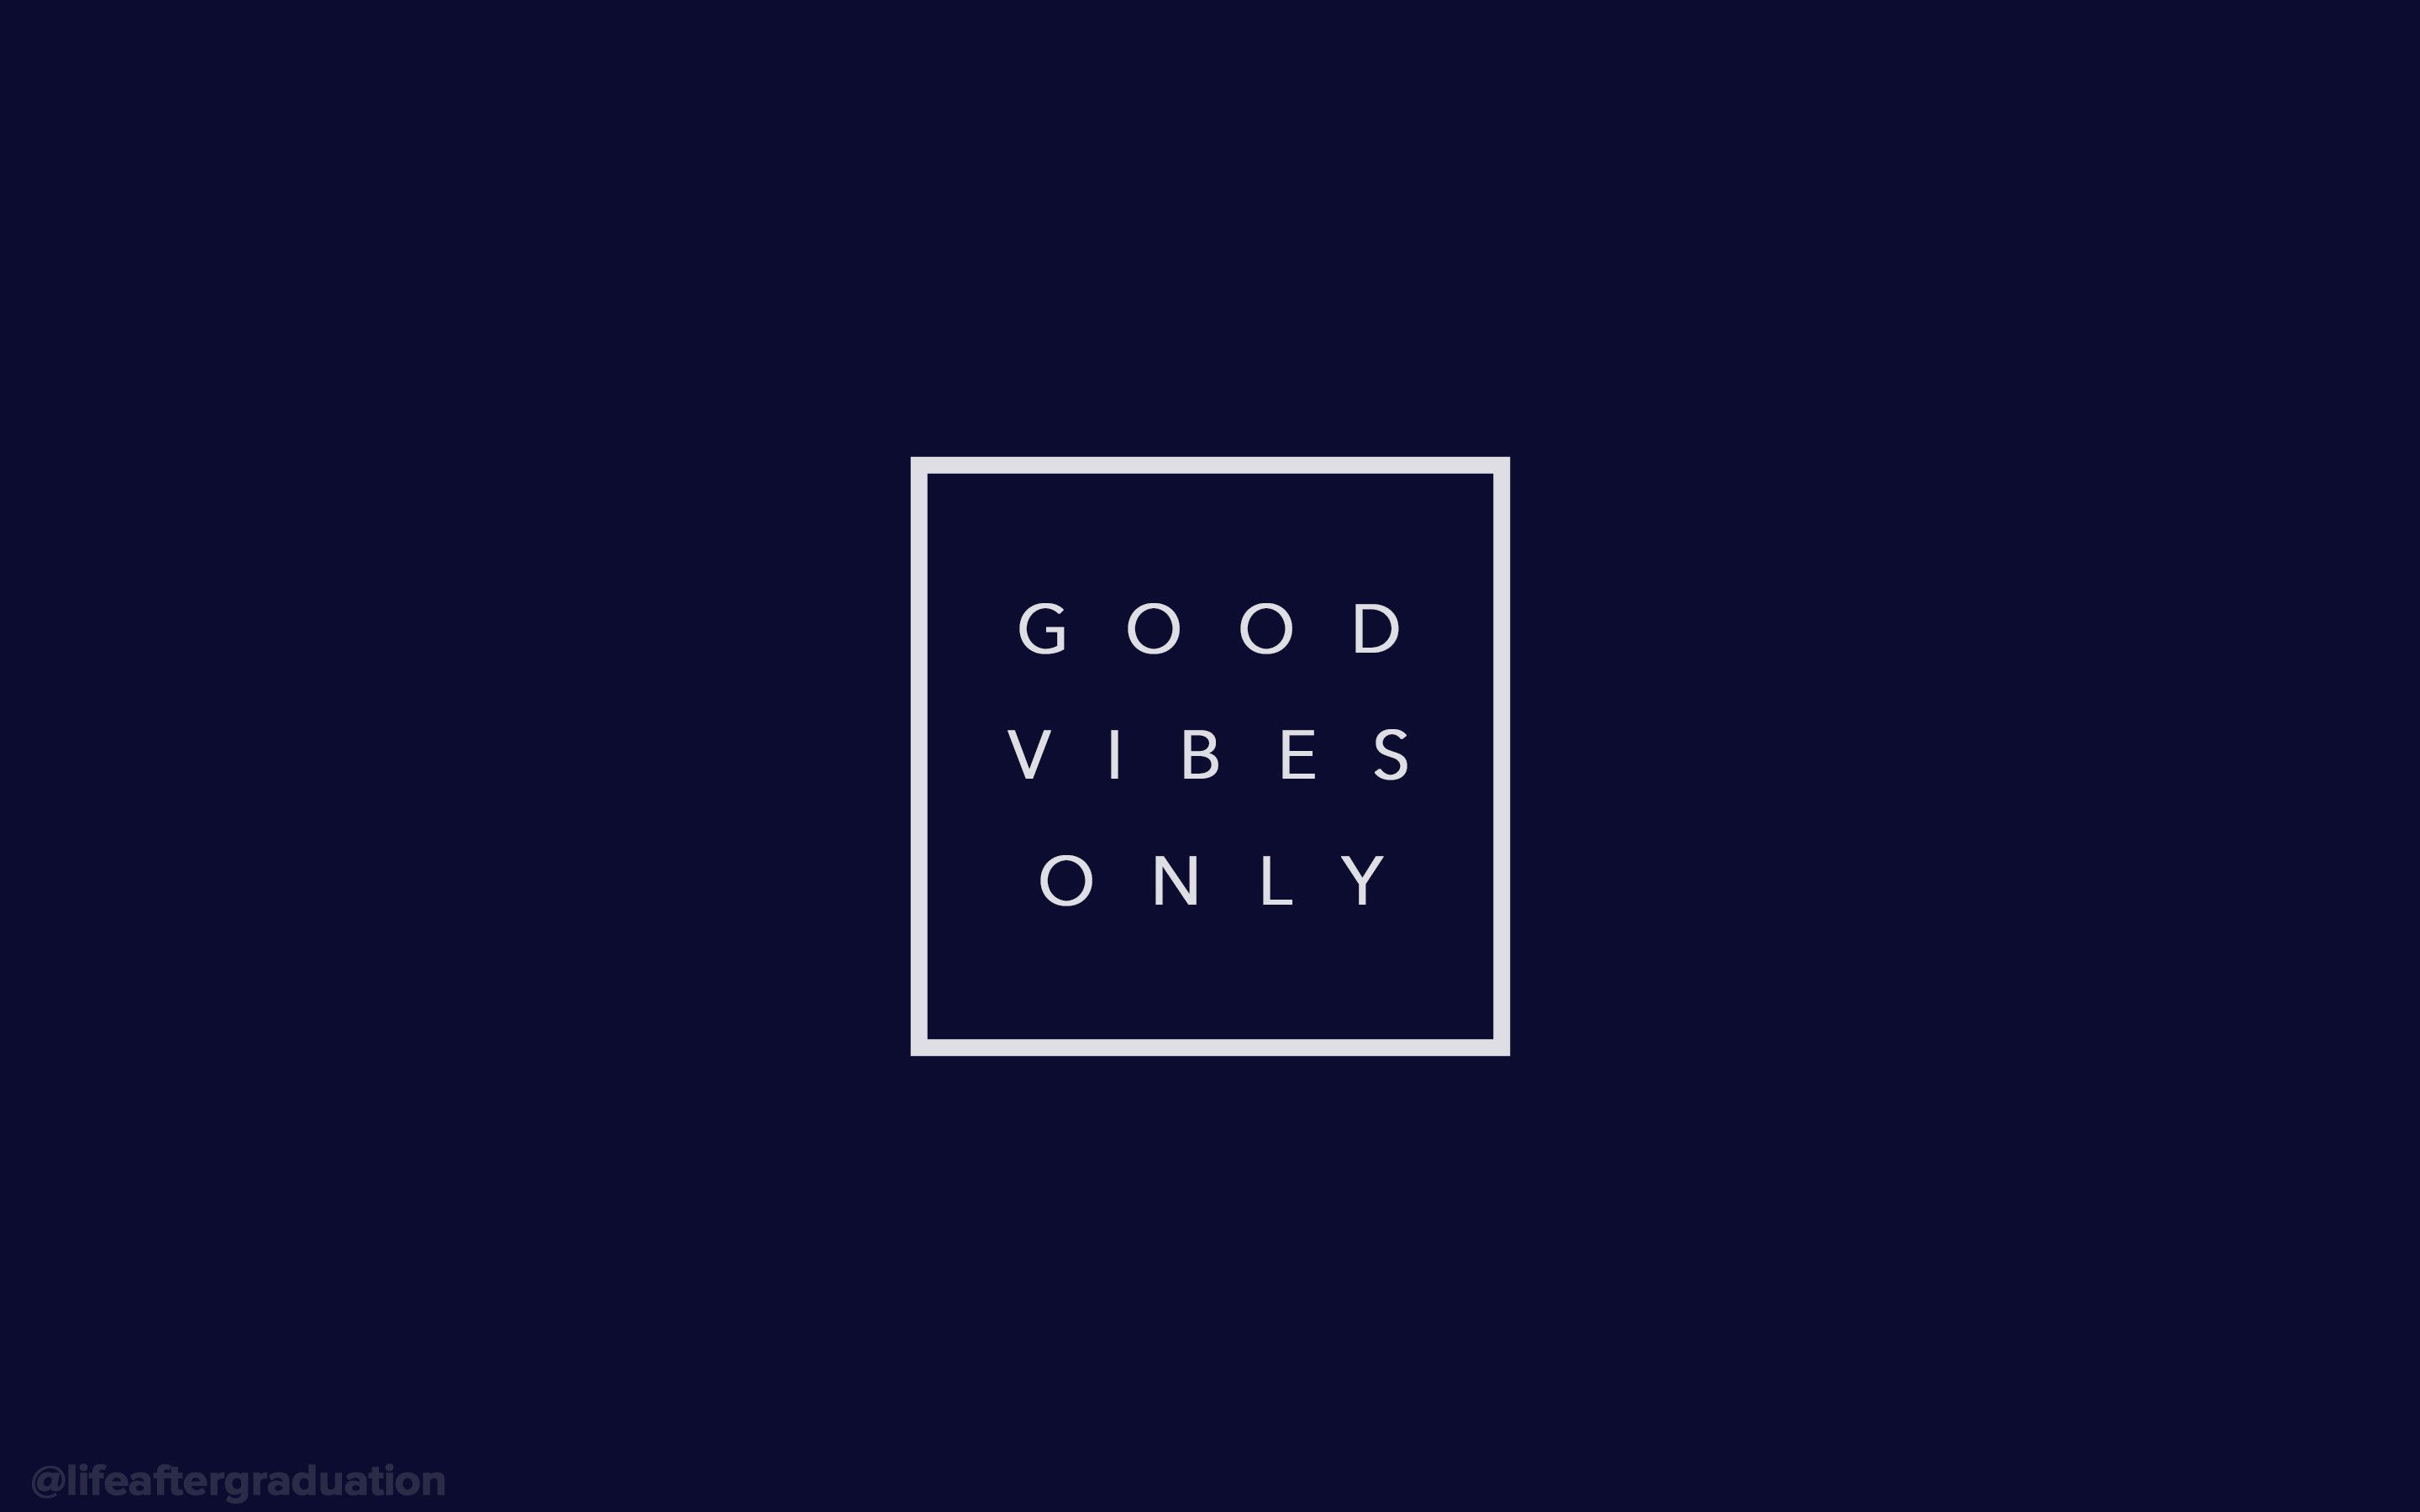 good vibes only (navy)